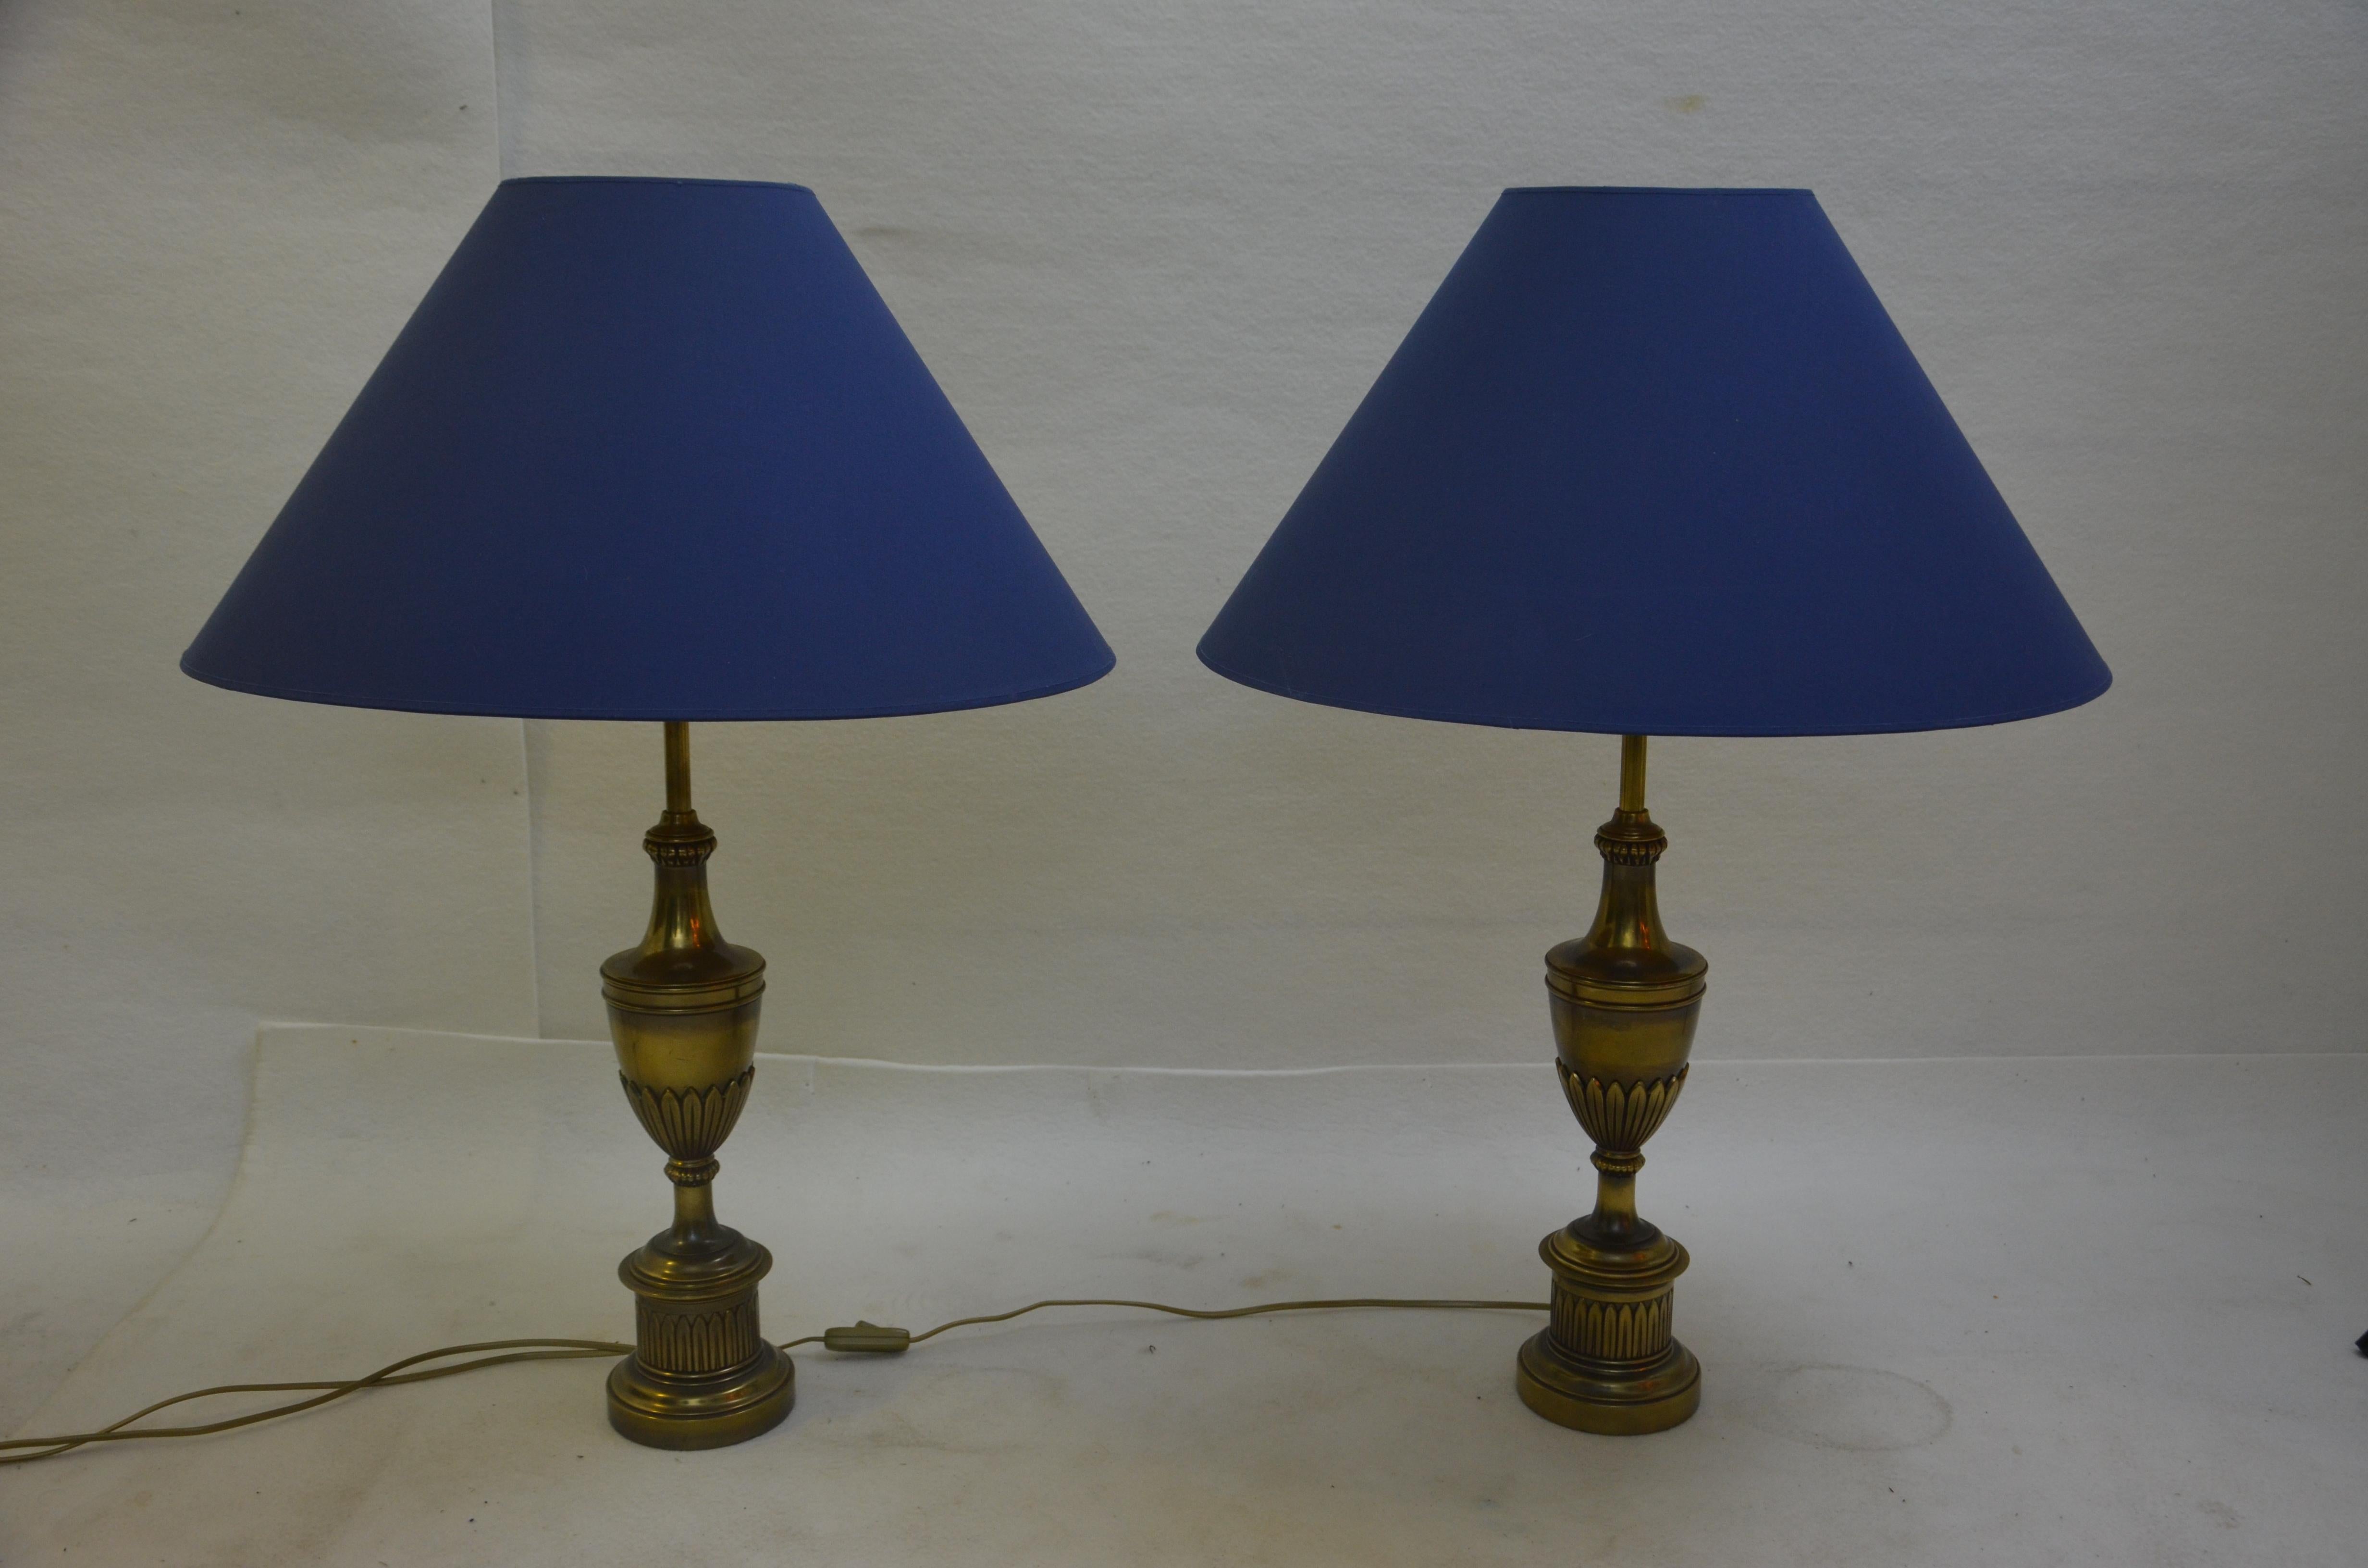 Pair of brass neoclassical style Stiffel table lamps with shades.